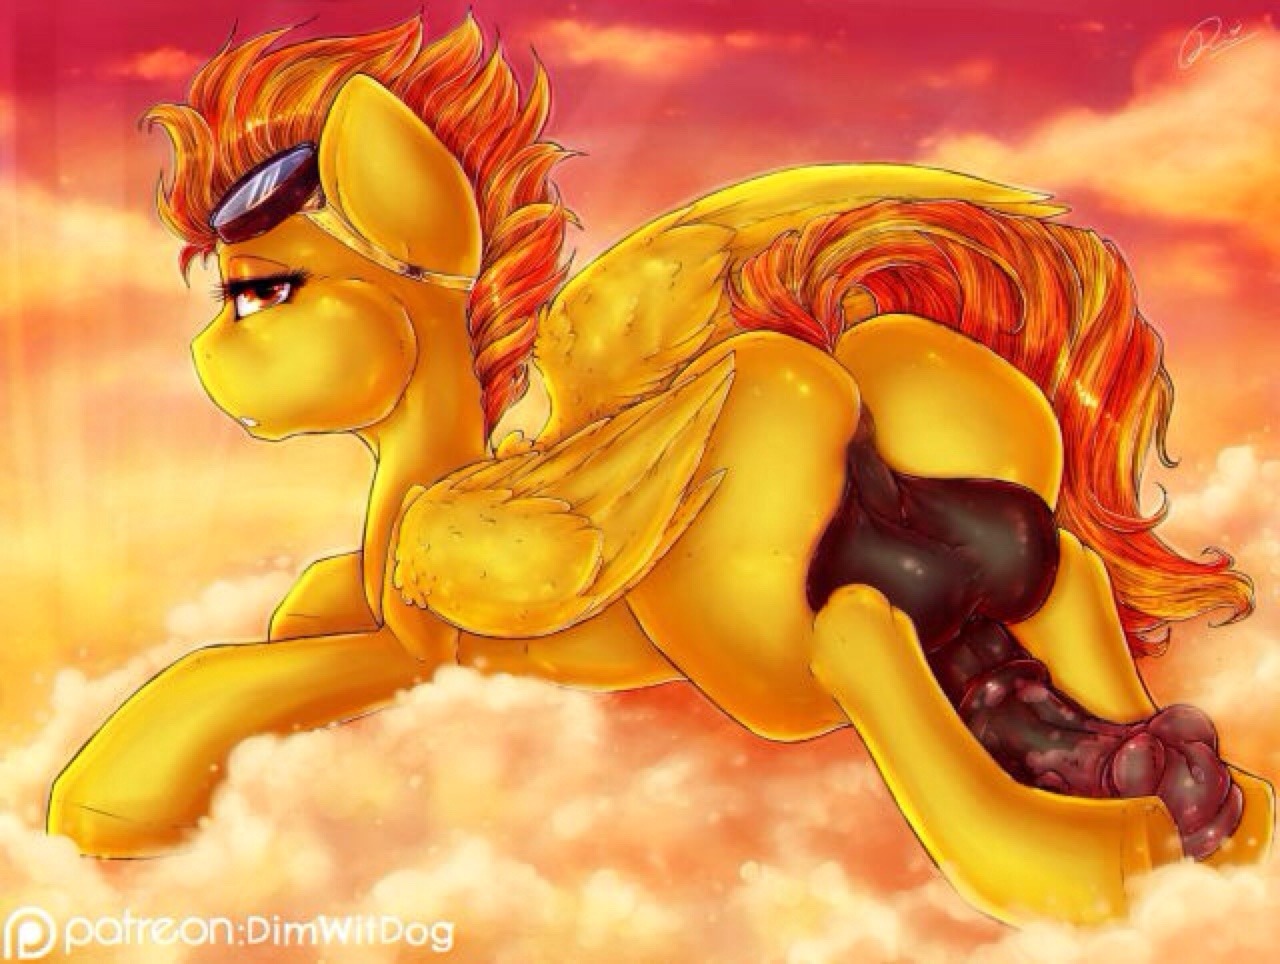 Spitfire cause she is amazing and the best all credit to @dimwitdog